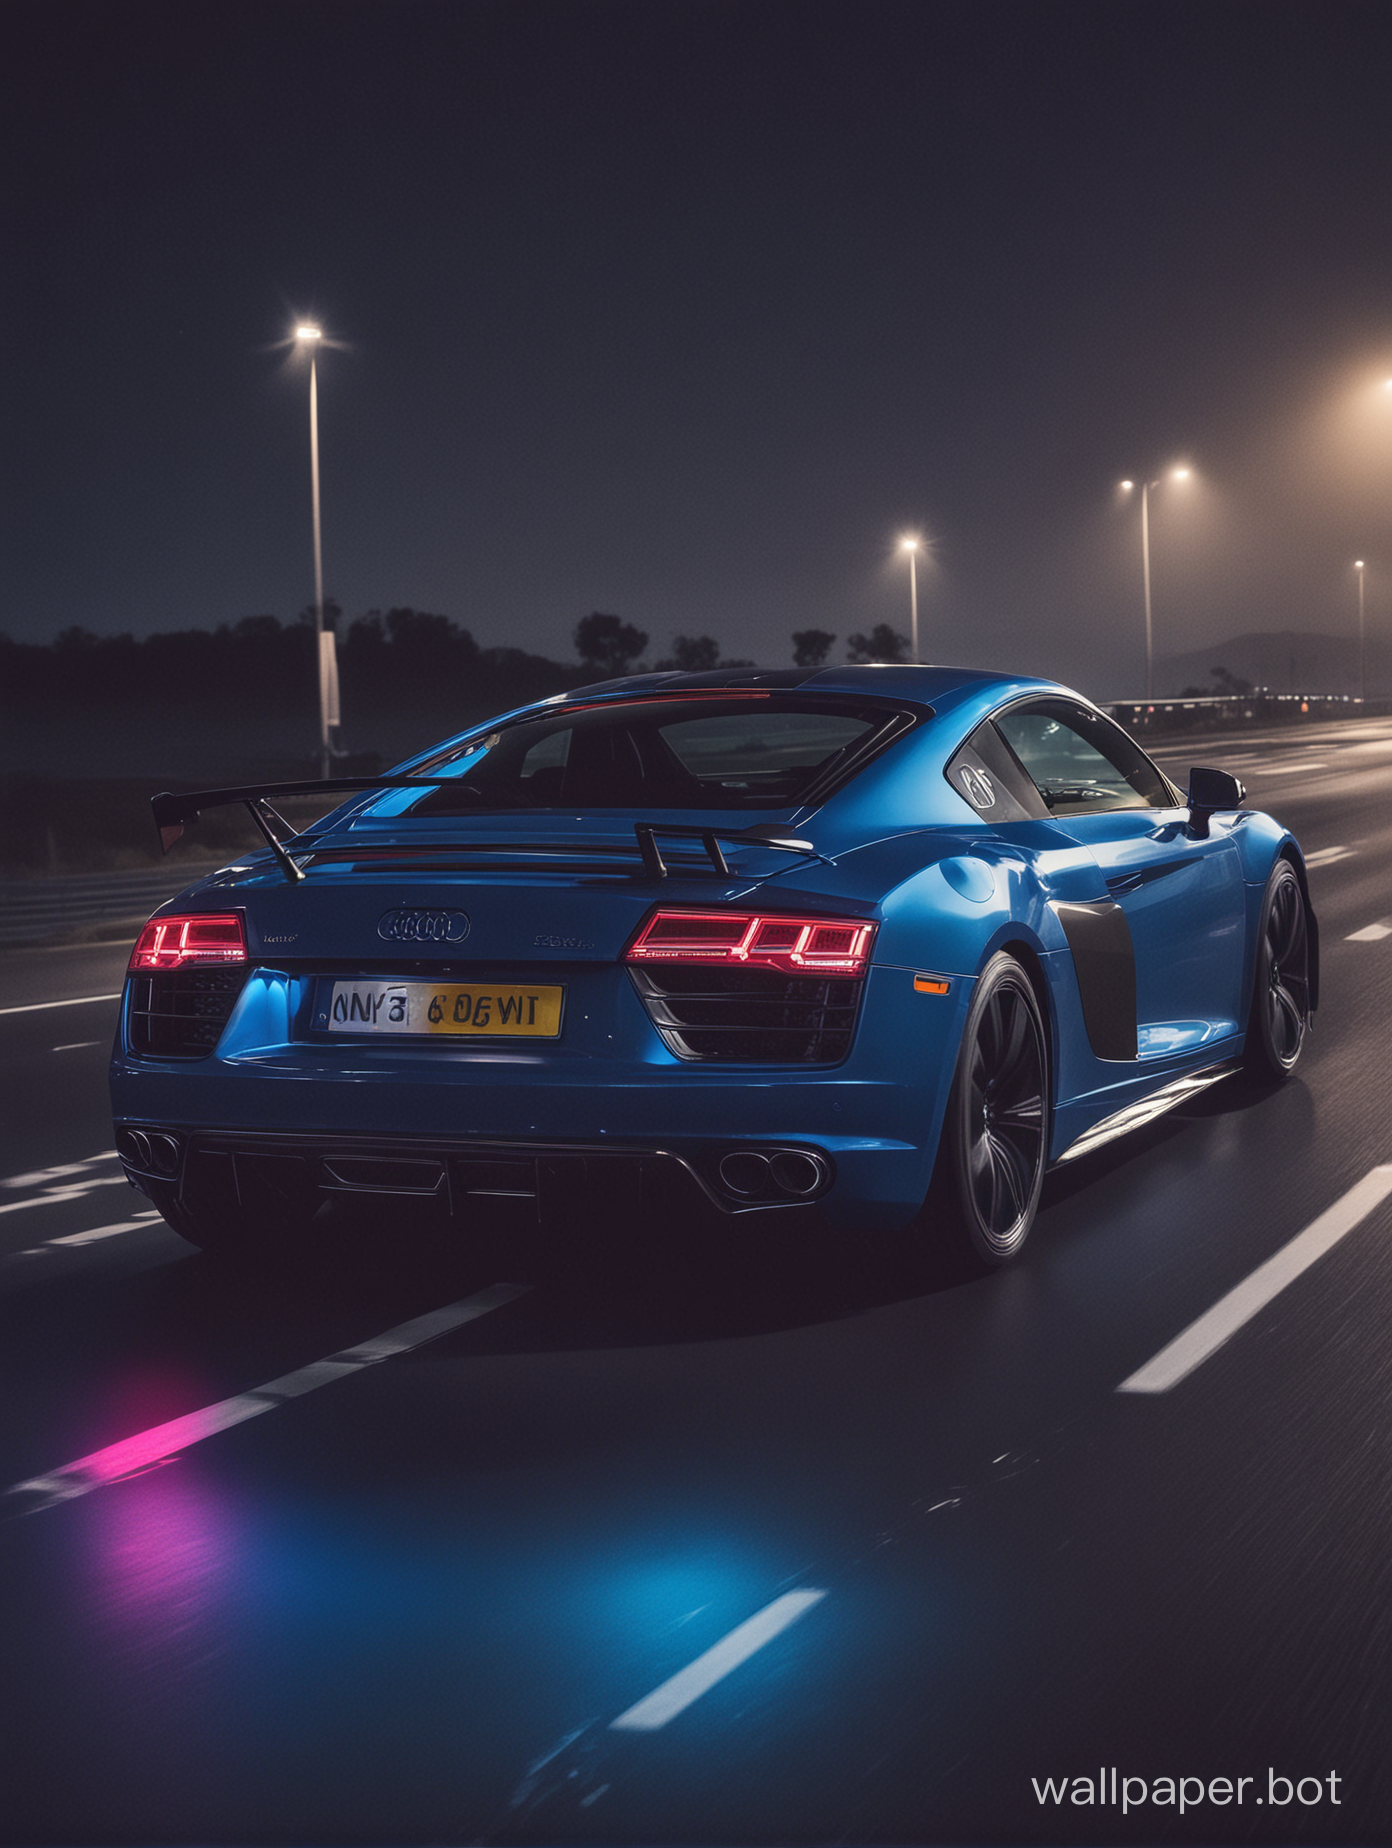 Blue audi r8 gt driving at night neon lights
